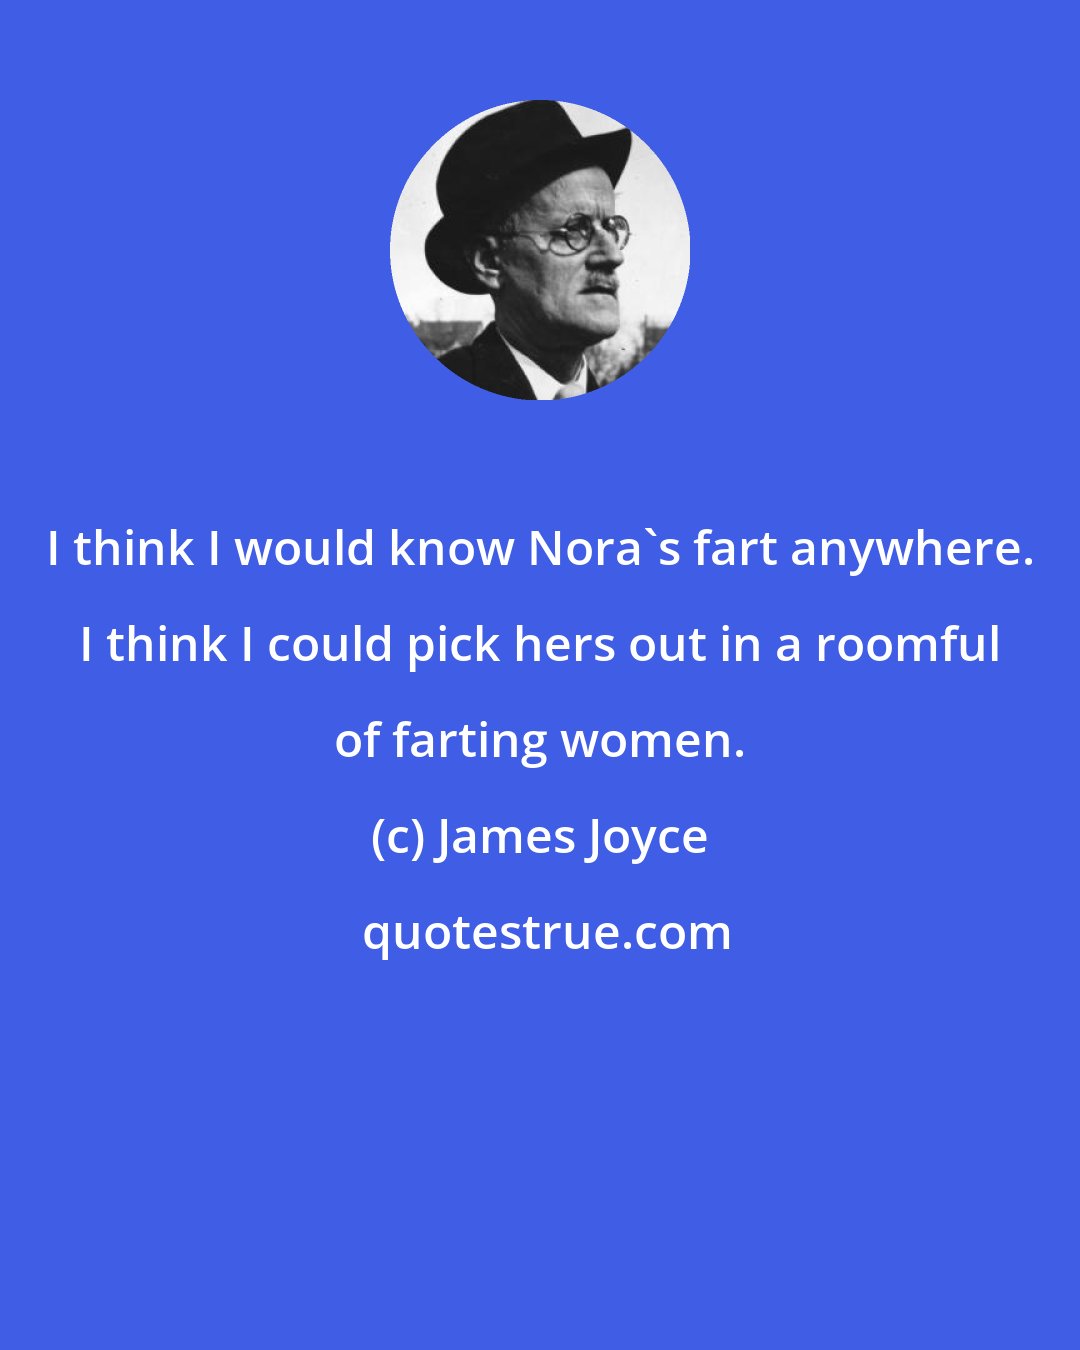 James Joyce: I think I would know Nora's fart anywhere. I think I could pick hers out in a roomful of farting women.